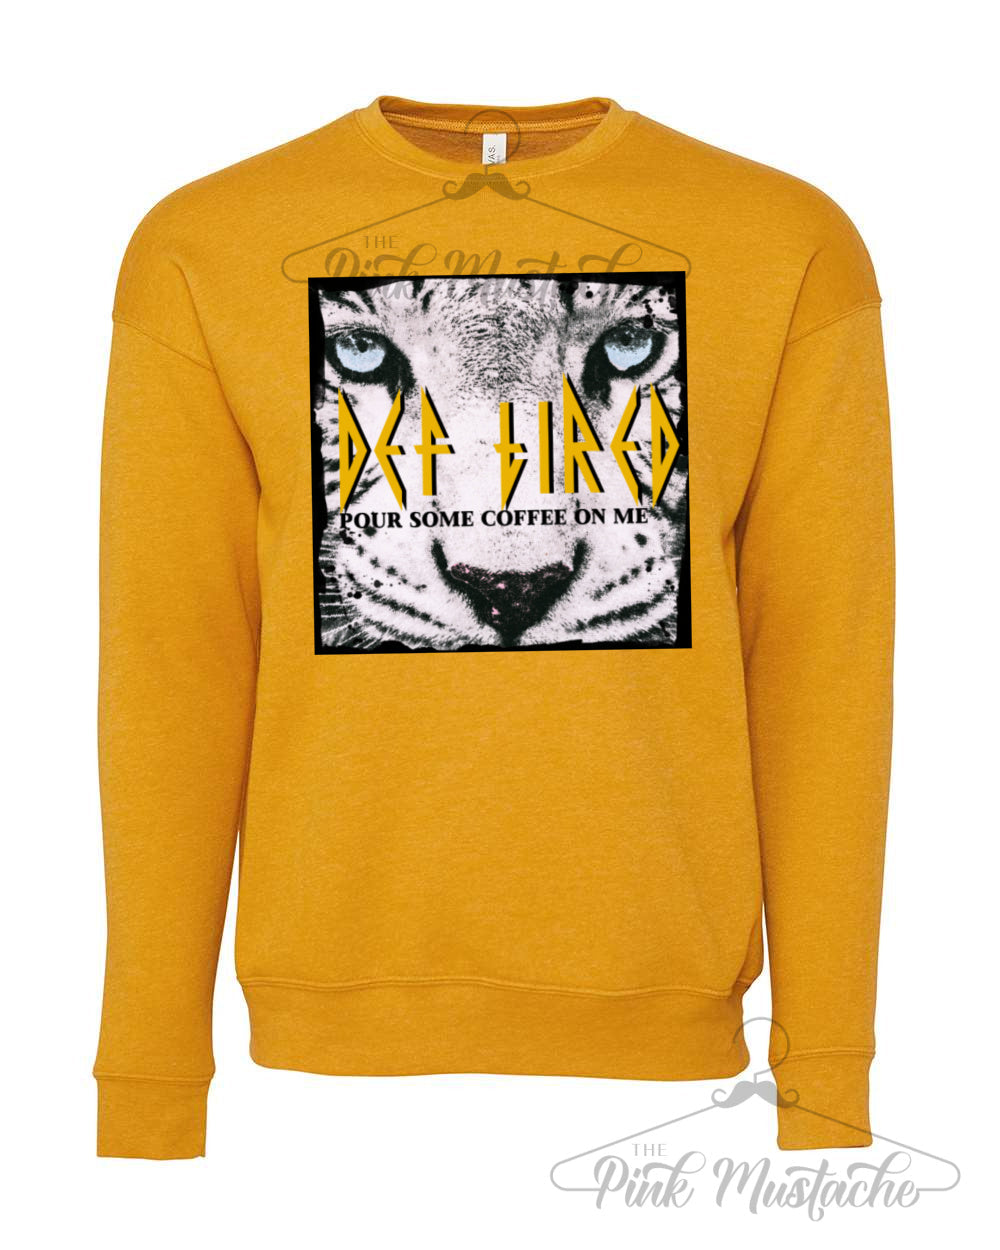 Def Tired - Pour Some Coffee On Me - Leopard Quality Bella Canvas Sweatshirt/ Softstyle Sweatshirt